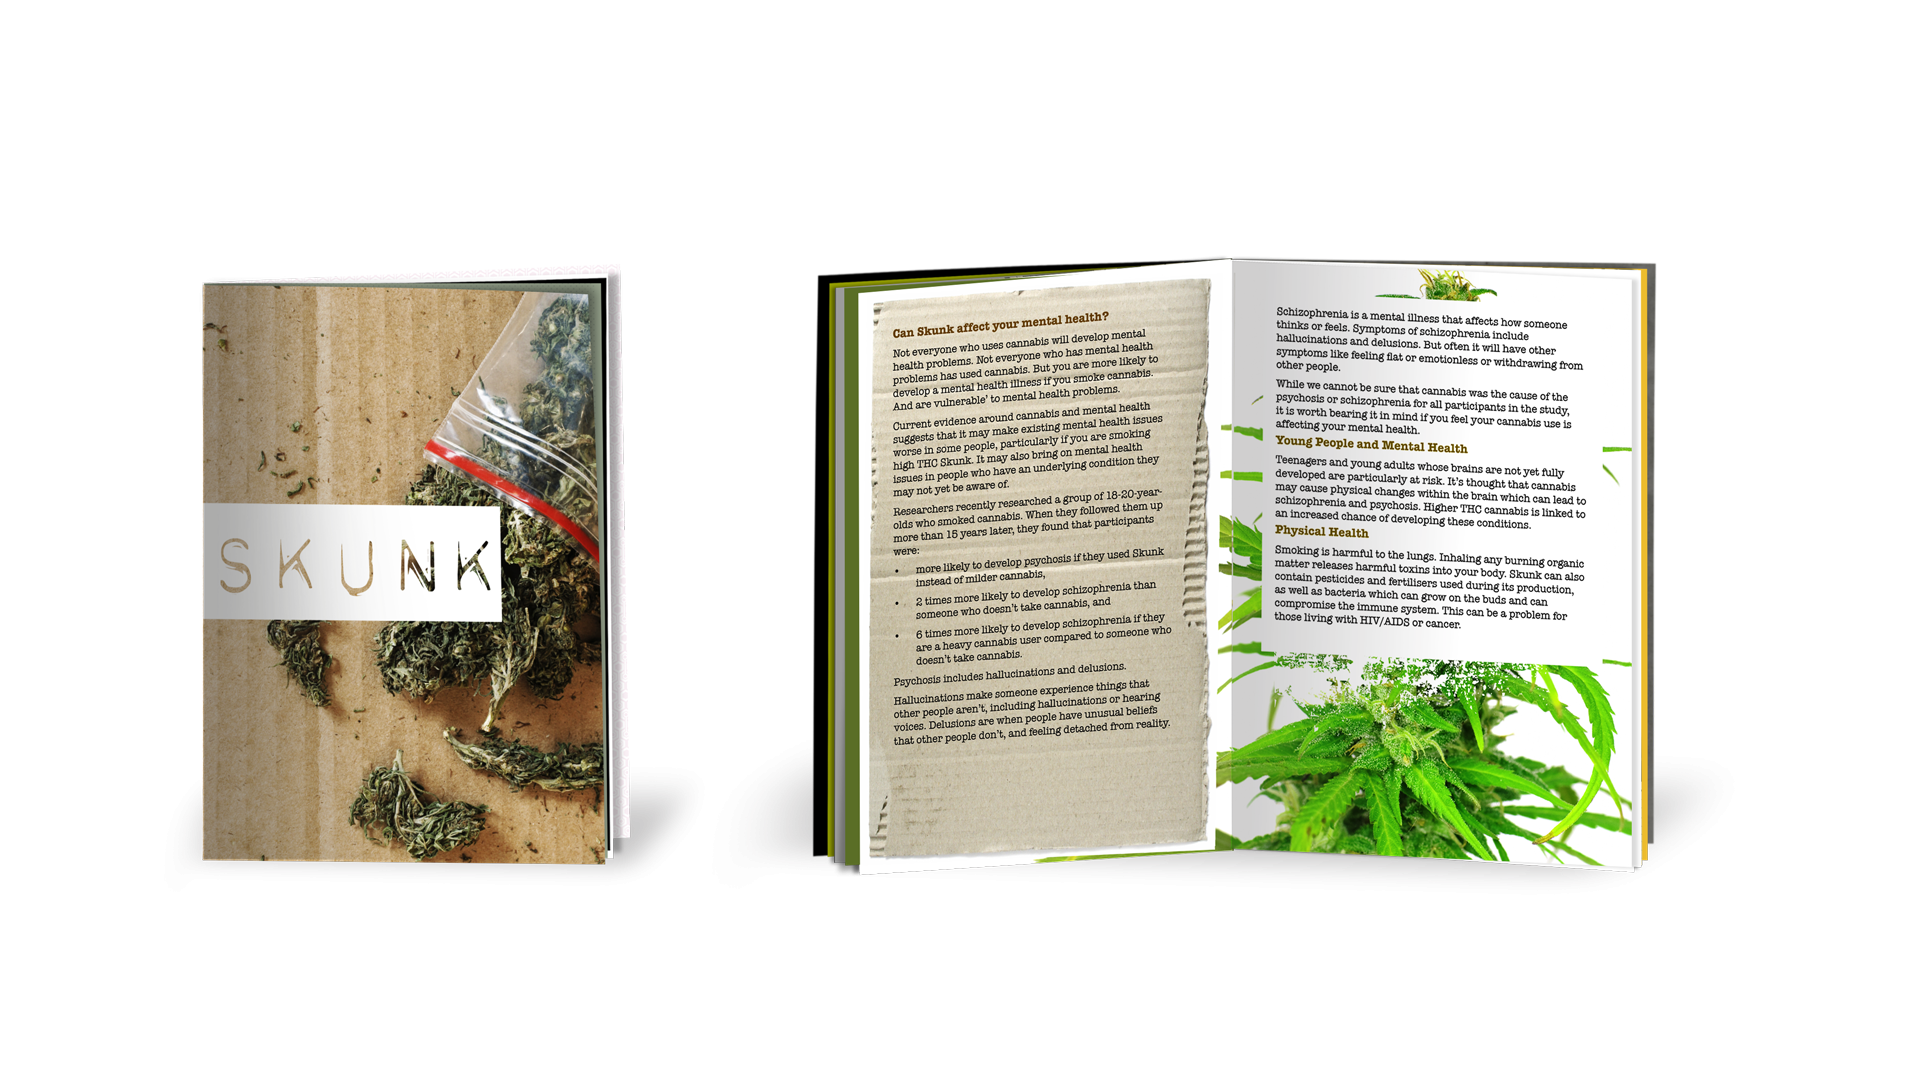 Cover and inside pages of skunk harm reduction booklet. Cover show a bag of skunk cannabis. Inside pages shows a cannabis plant 